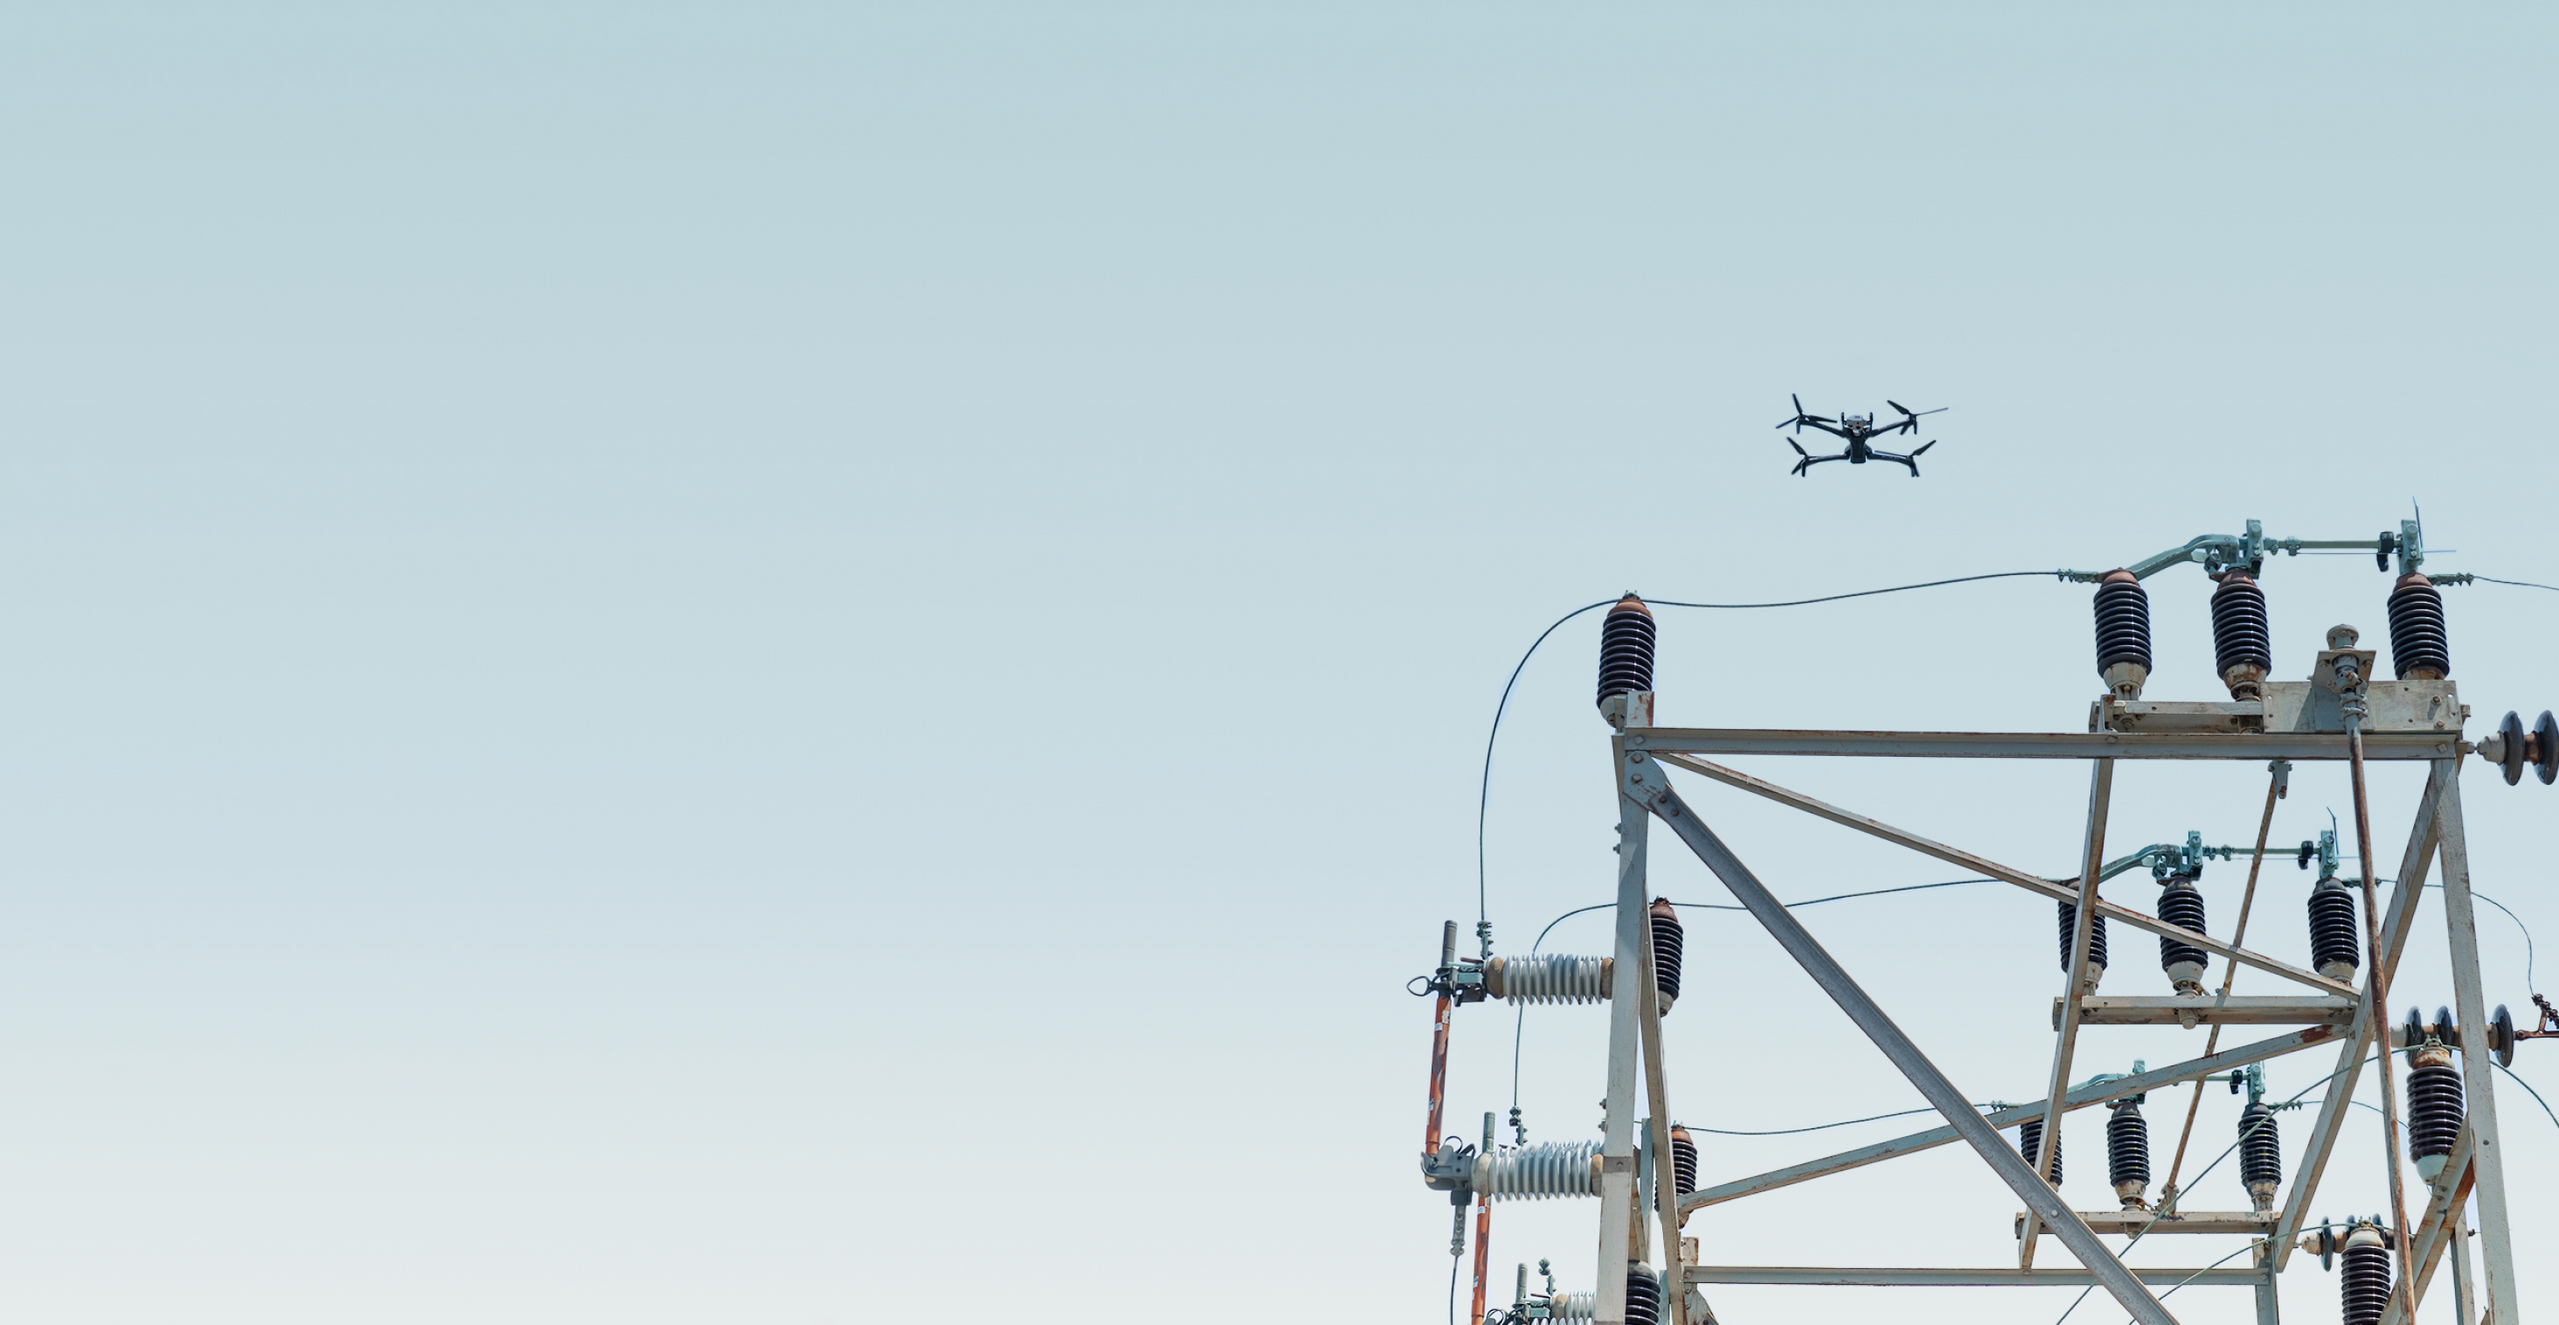 Skydio drone operating remotely in substation